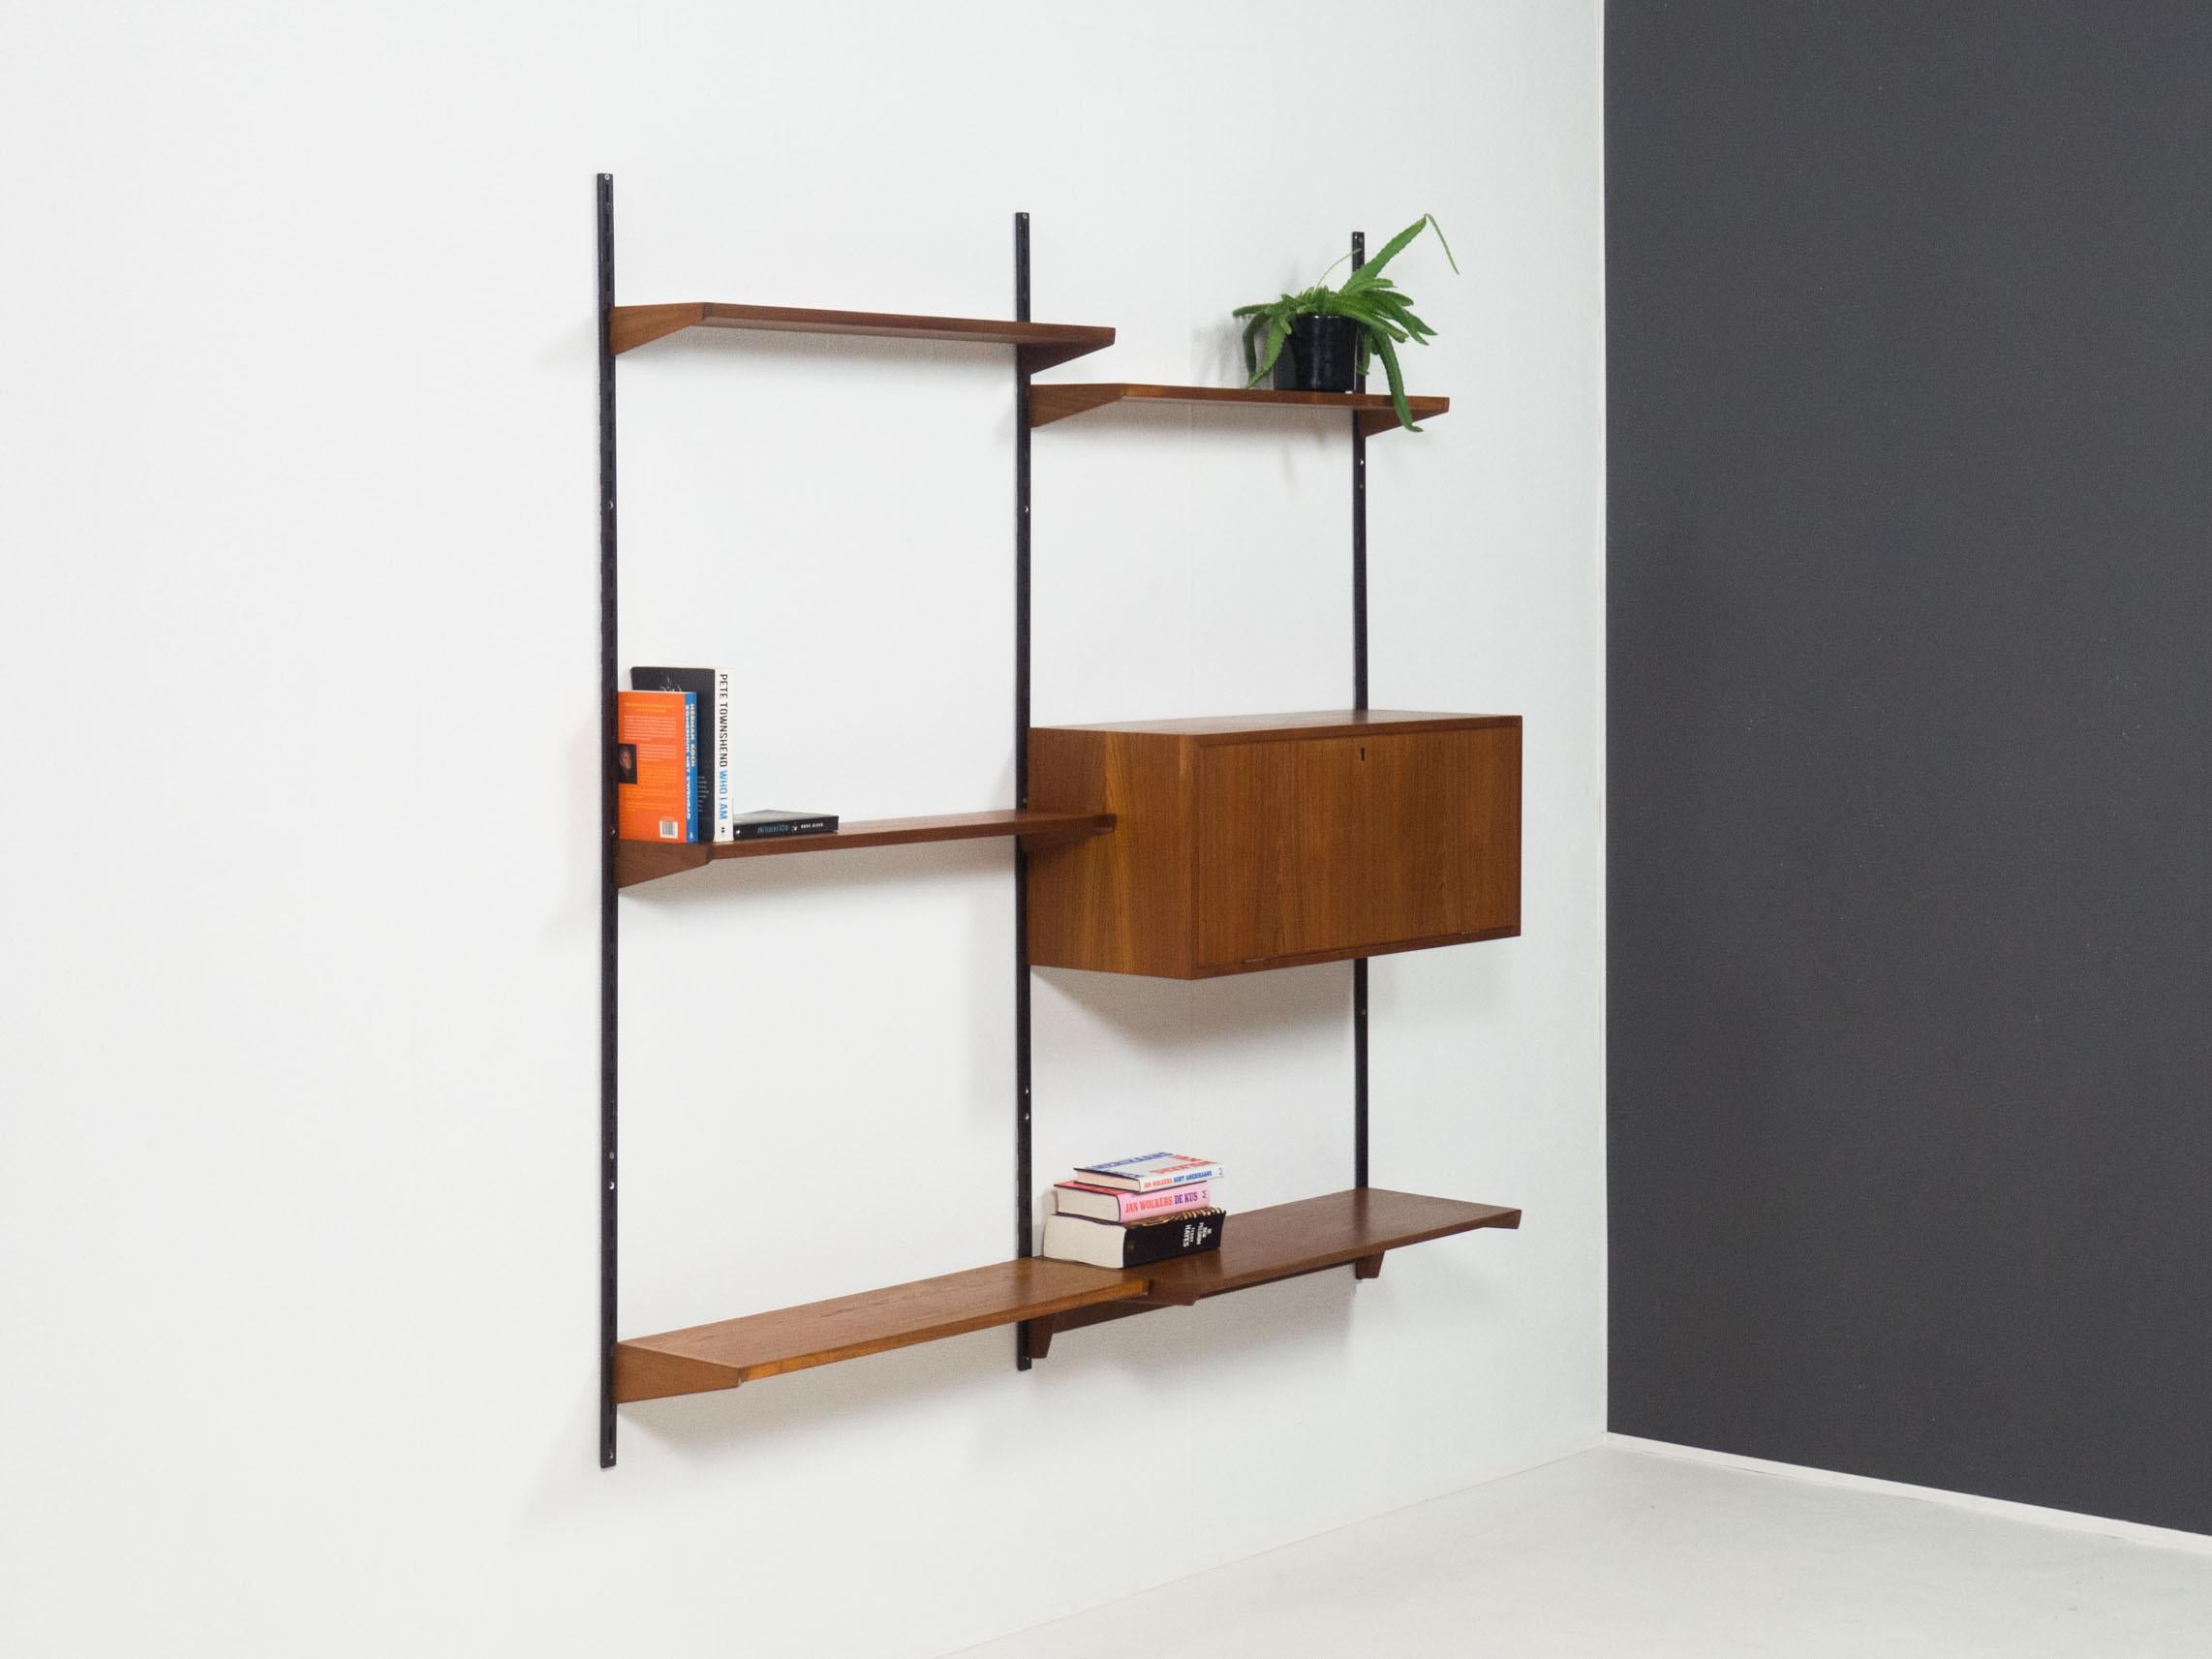 Wall unit designed by Kai Kristiansen for Feldballes Møbelfabrik, Denmark in the 1960s.

This wall unit is completely veneered in teak, with brown coated wall rails. The sides of the shelves are made of solid teak.

The unit is in very good